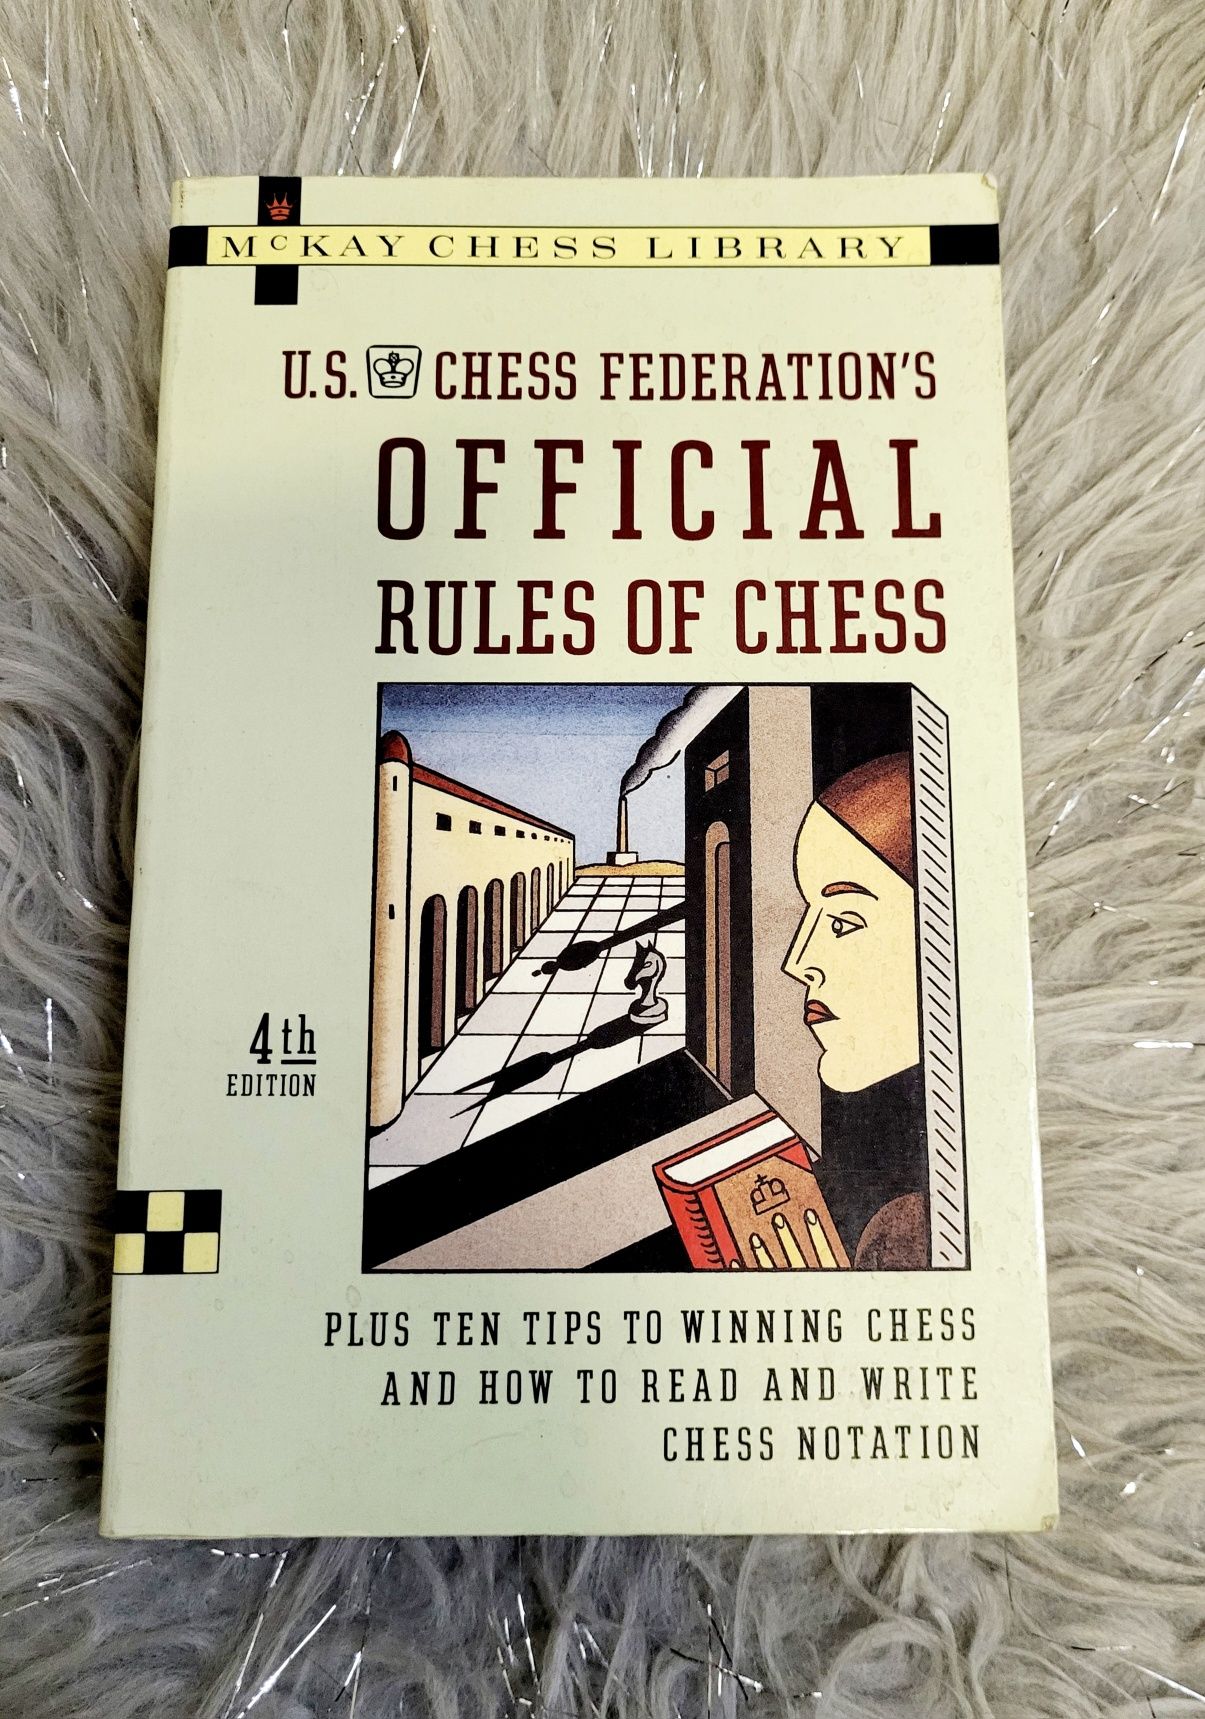 Official Rules of Chess MCKay Chess Library